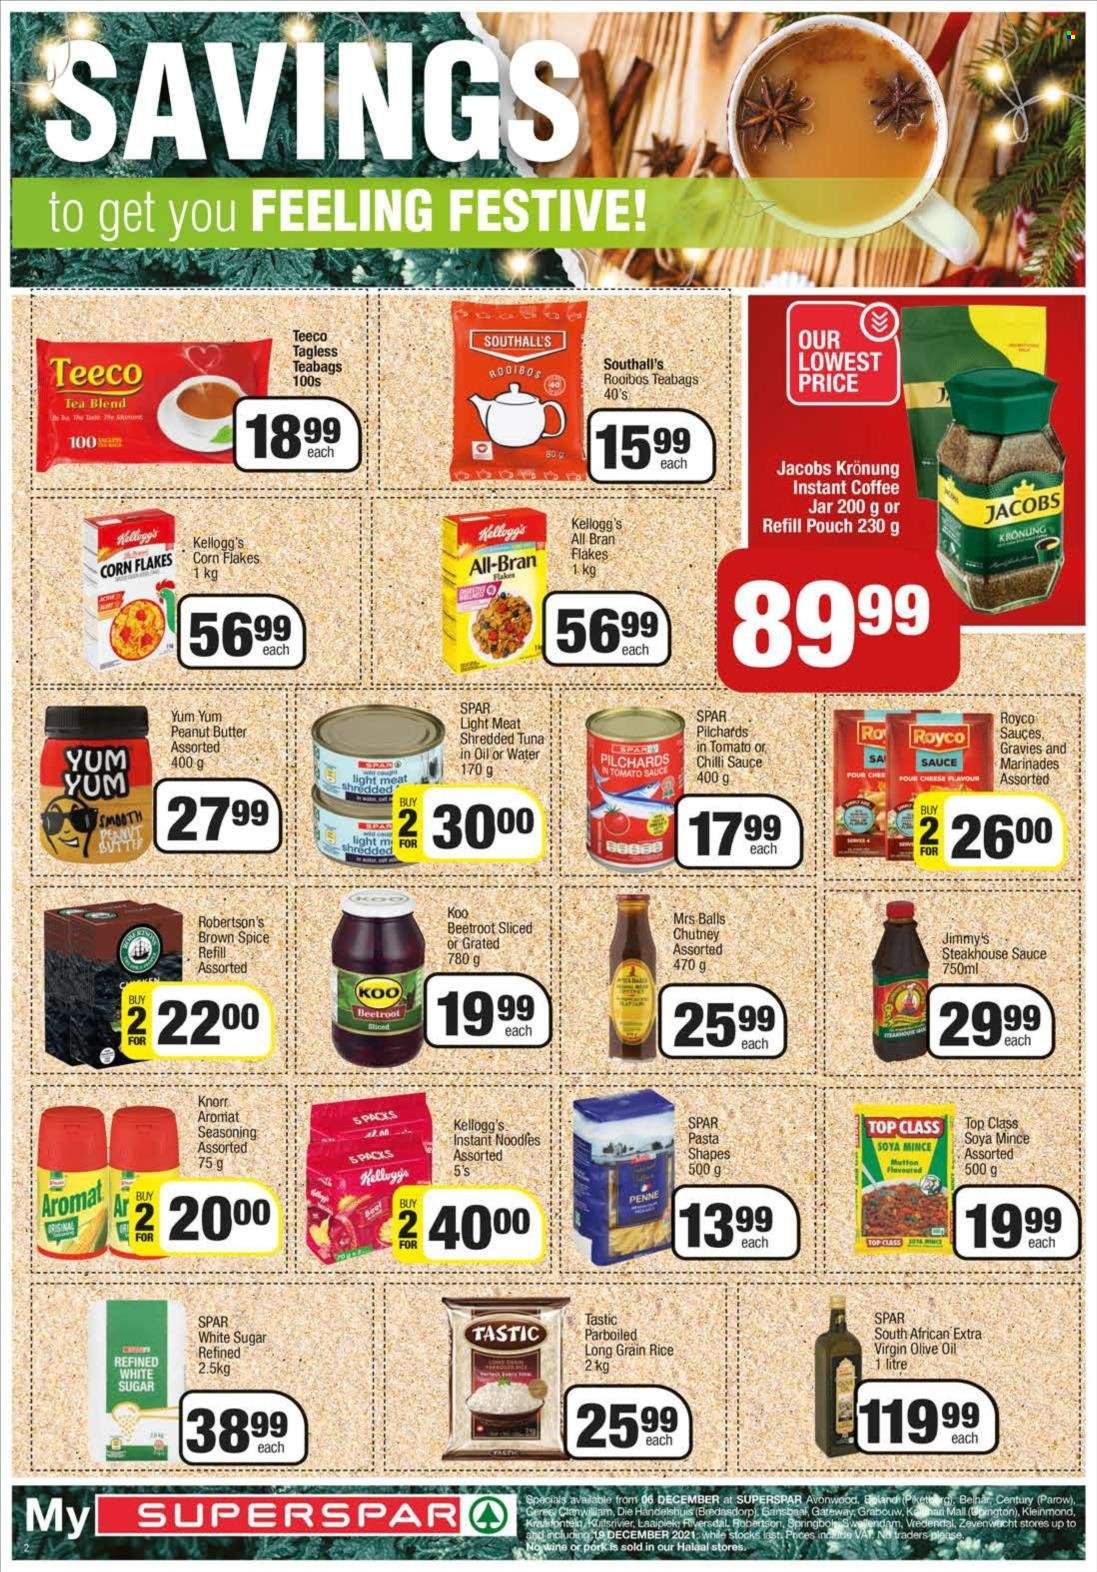 SPAR catalogue  - 06/12/2021 - 19/12/2021 - Sales products - sardines, tuna, pasta, instant noodles, Knorr, noodles, Kellogg's, sugar, soya mince, Koo, corn flakes, bran flakes, All-Bran, rice, Tastic, penne, long grain rice, spice, chutney, extra virgin olive oil, olive oil, peanut butter, tea, tea bags, rooibos tea, instant coffee, Jacobs, Jacobs Krönung. Page 2.